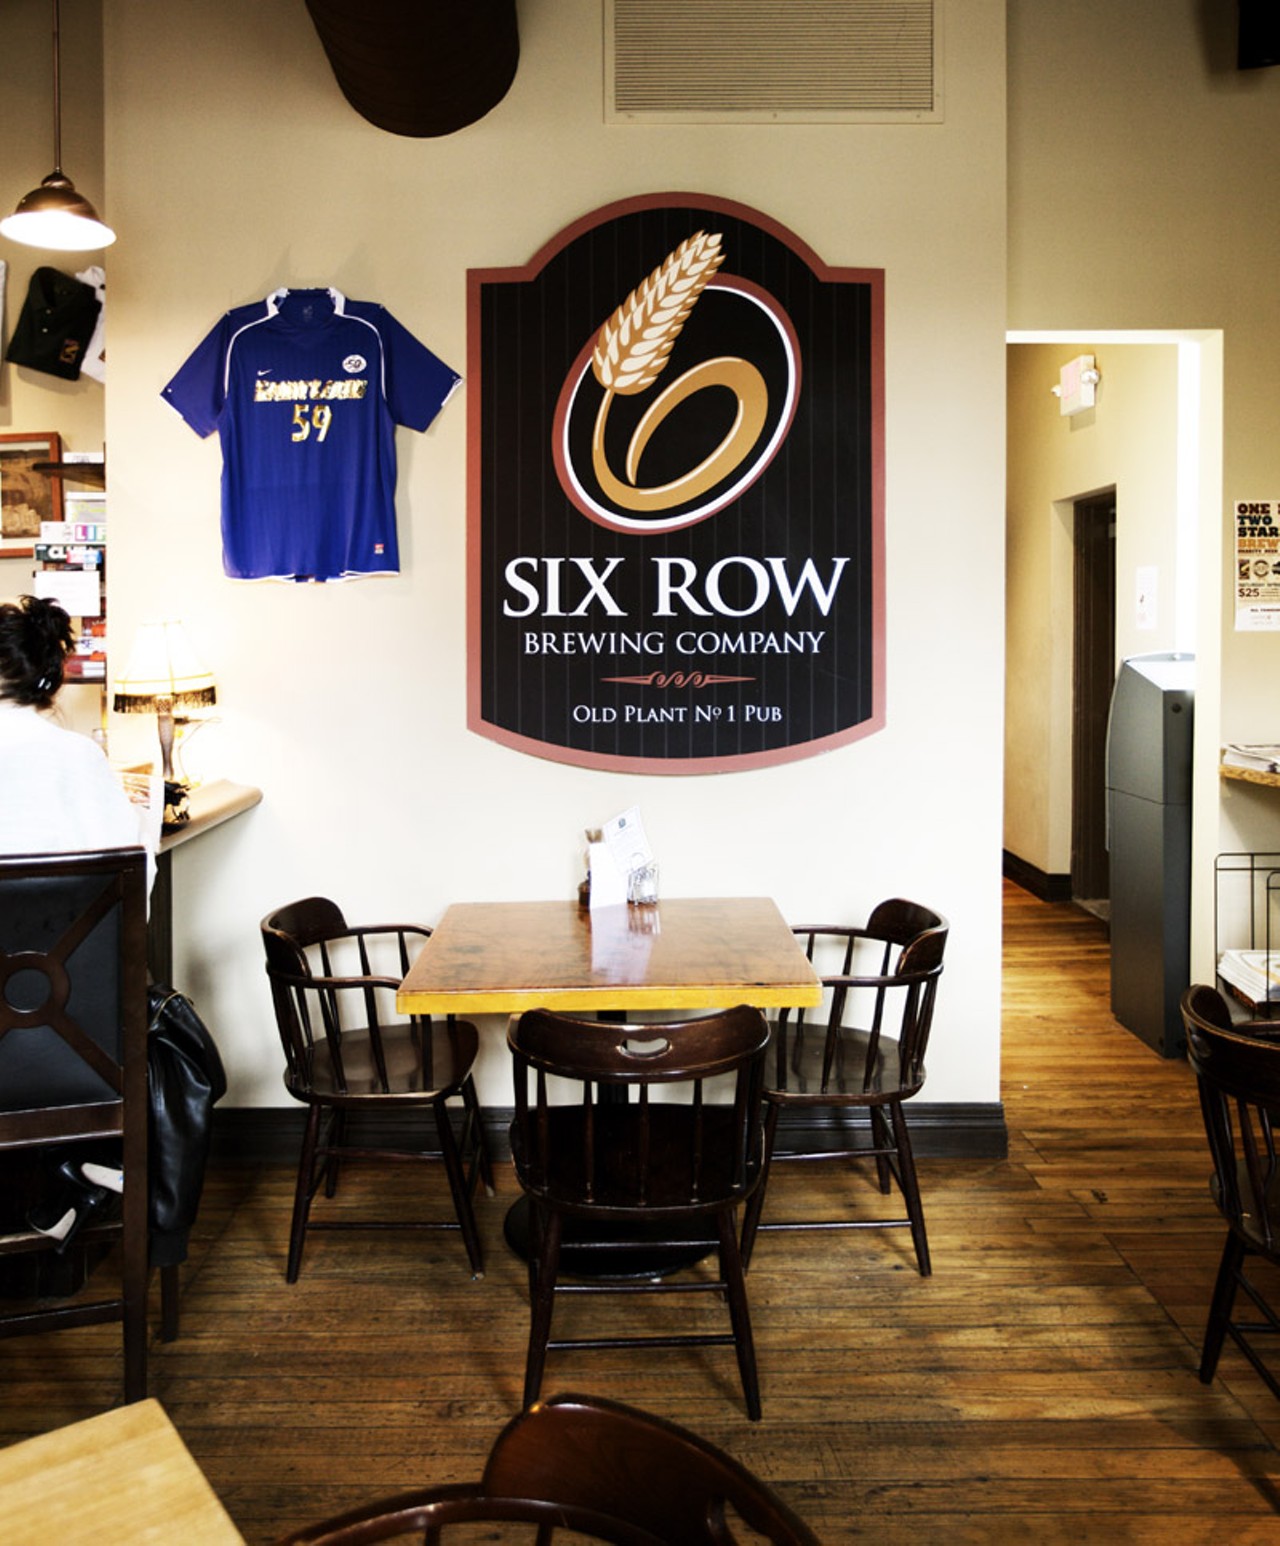 A quiet Saturday afternoon at Six Row Brewing on Forest Park near SLU.